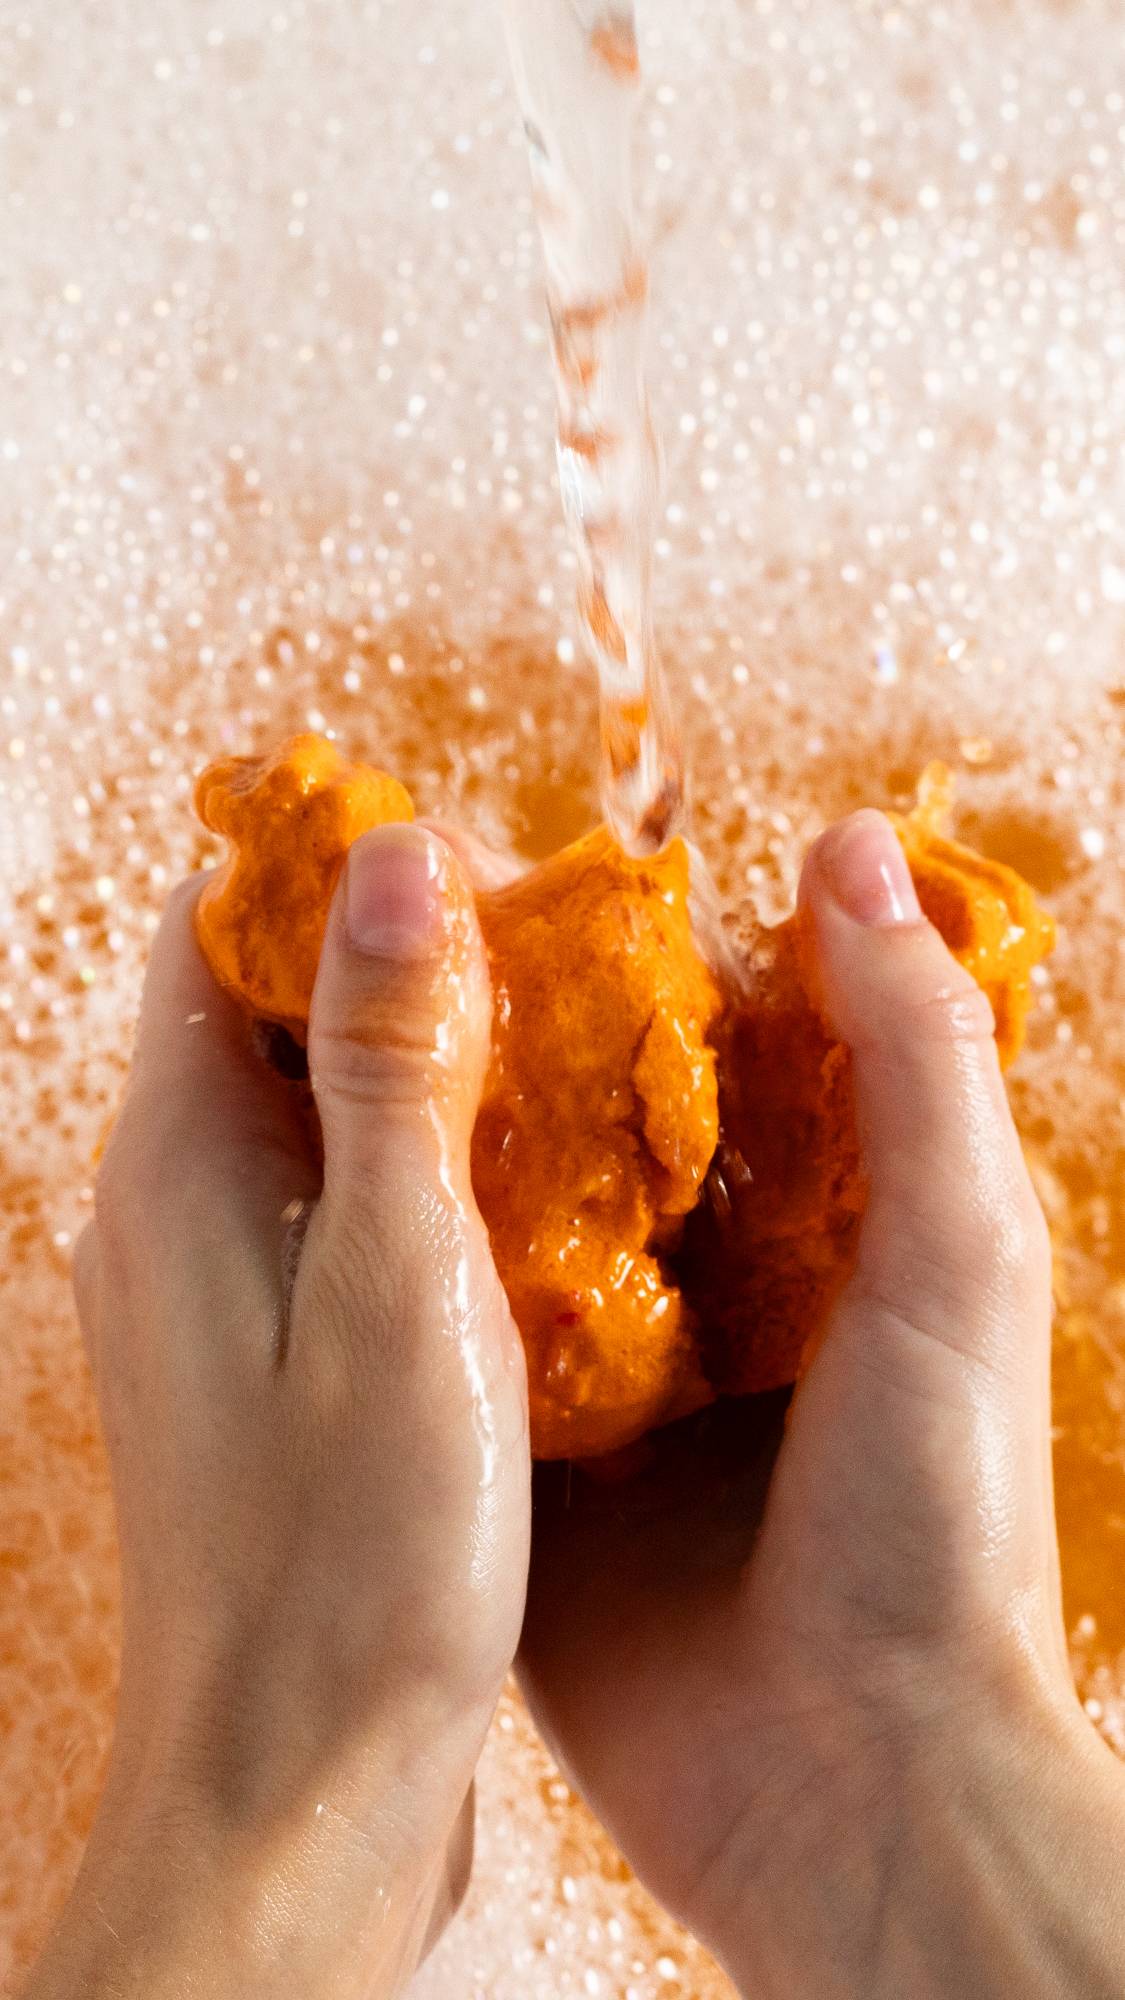 Image shows model crumbling the Reindeer bubble bar under running water as orange bubbles form in peaks below.